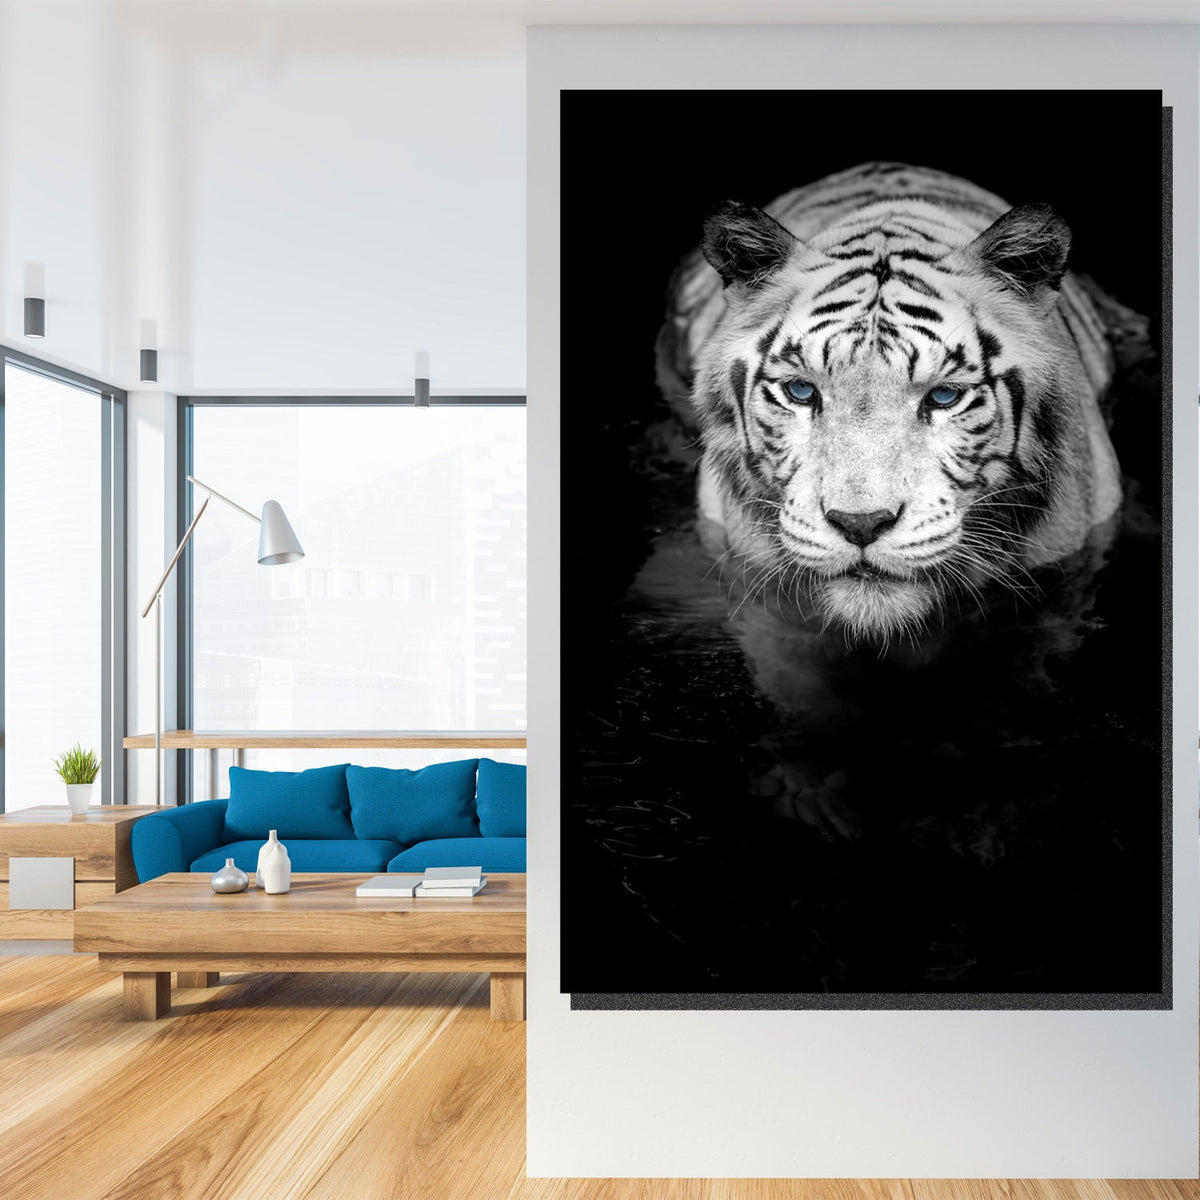 https://cdn.shopify.com/s/files/1/0387/9986/8044/products/WhiteTigerintheWaterCanvasArtprintStretched-4.jpg